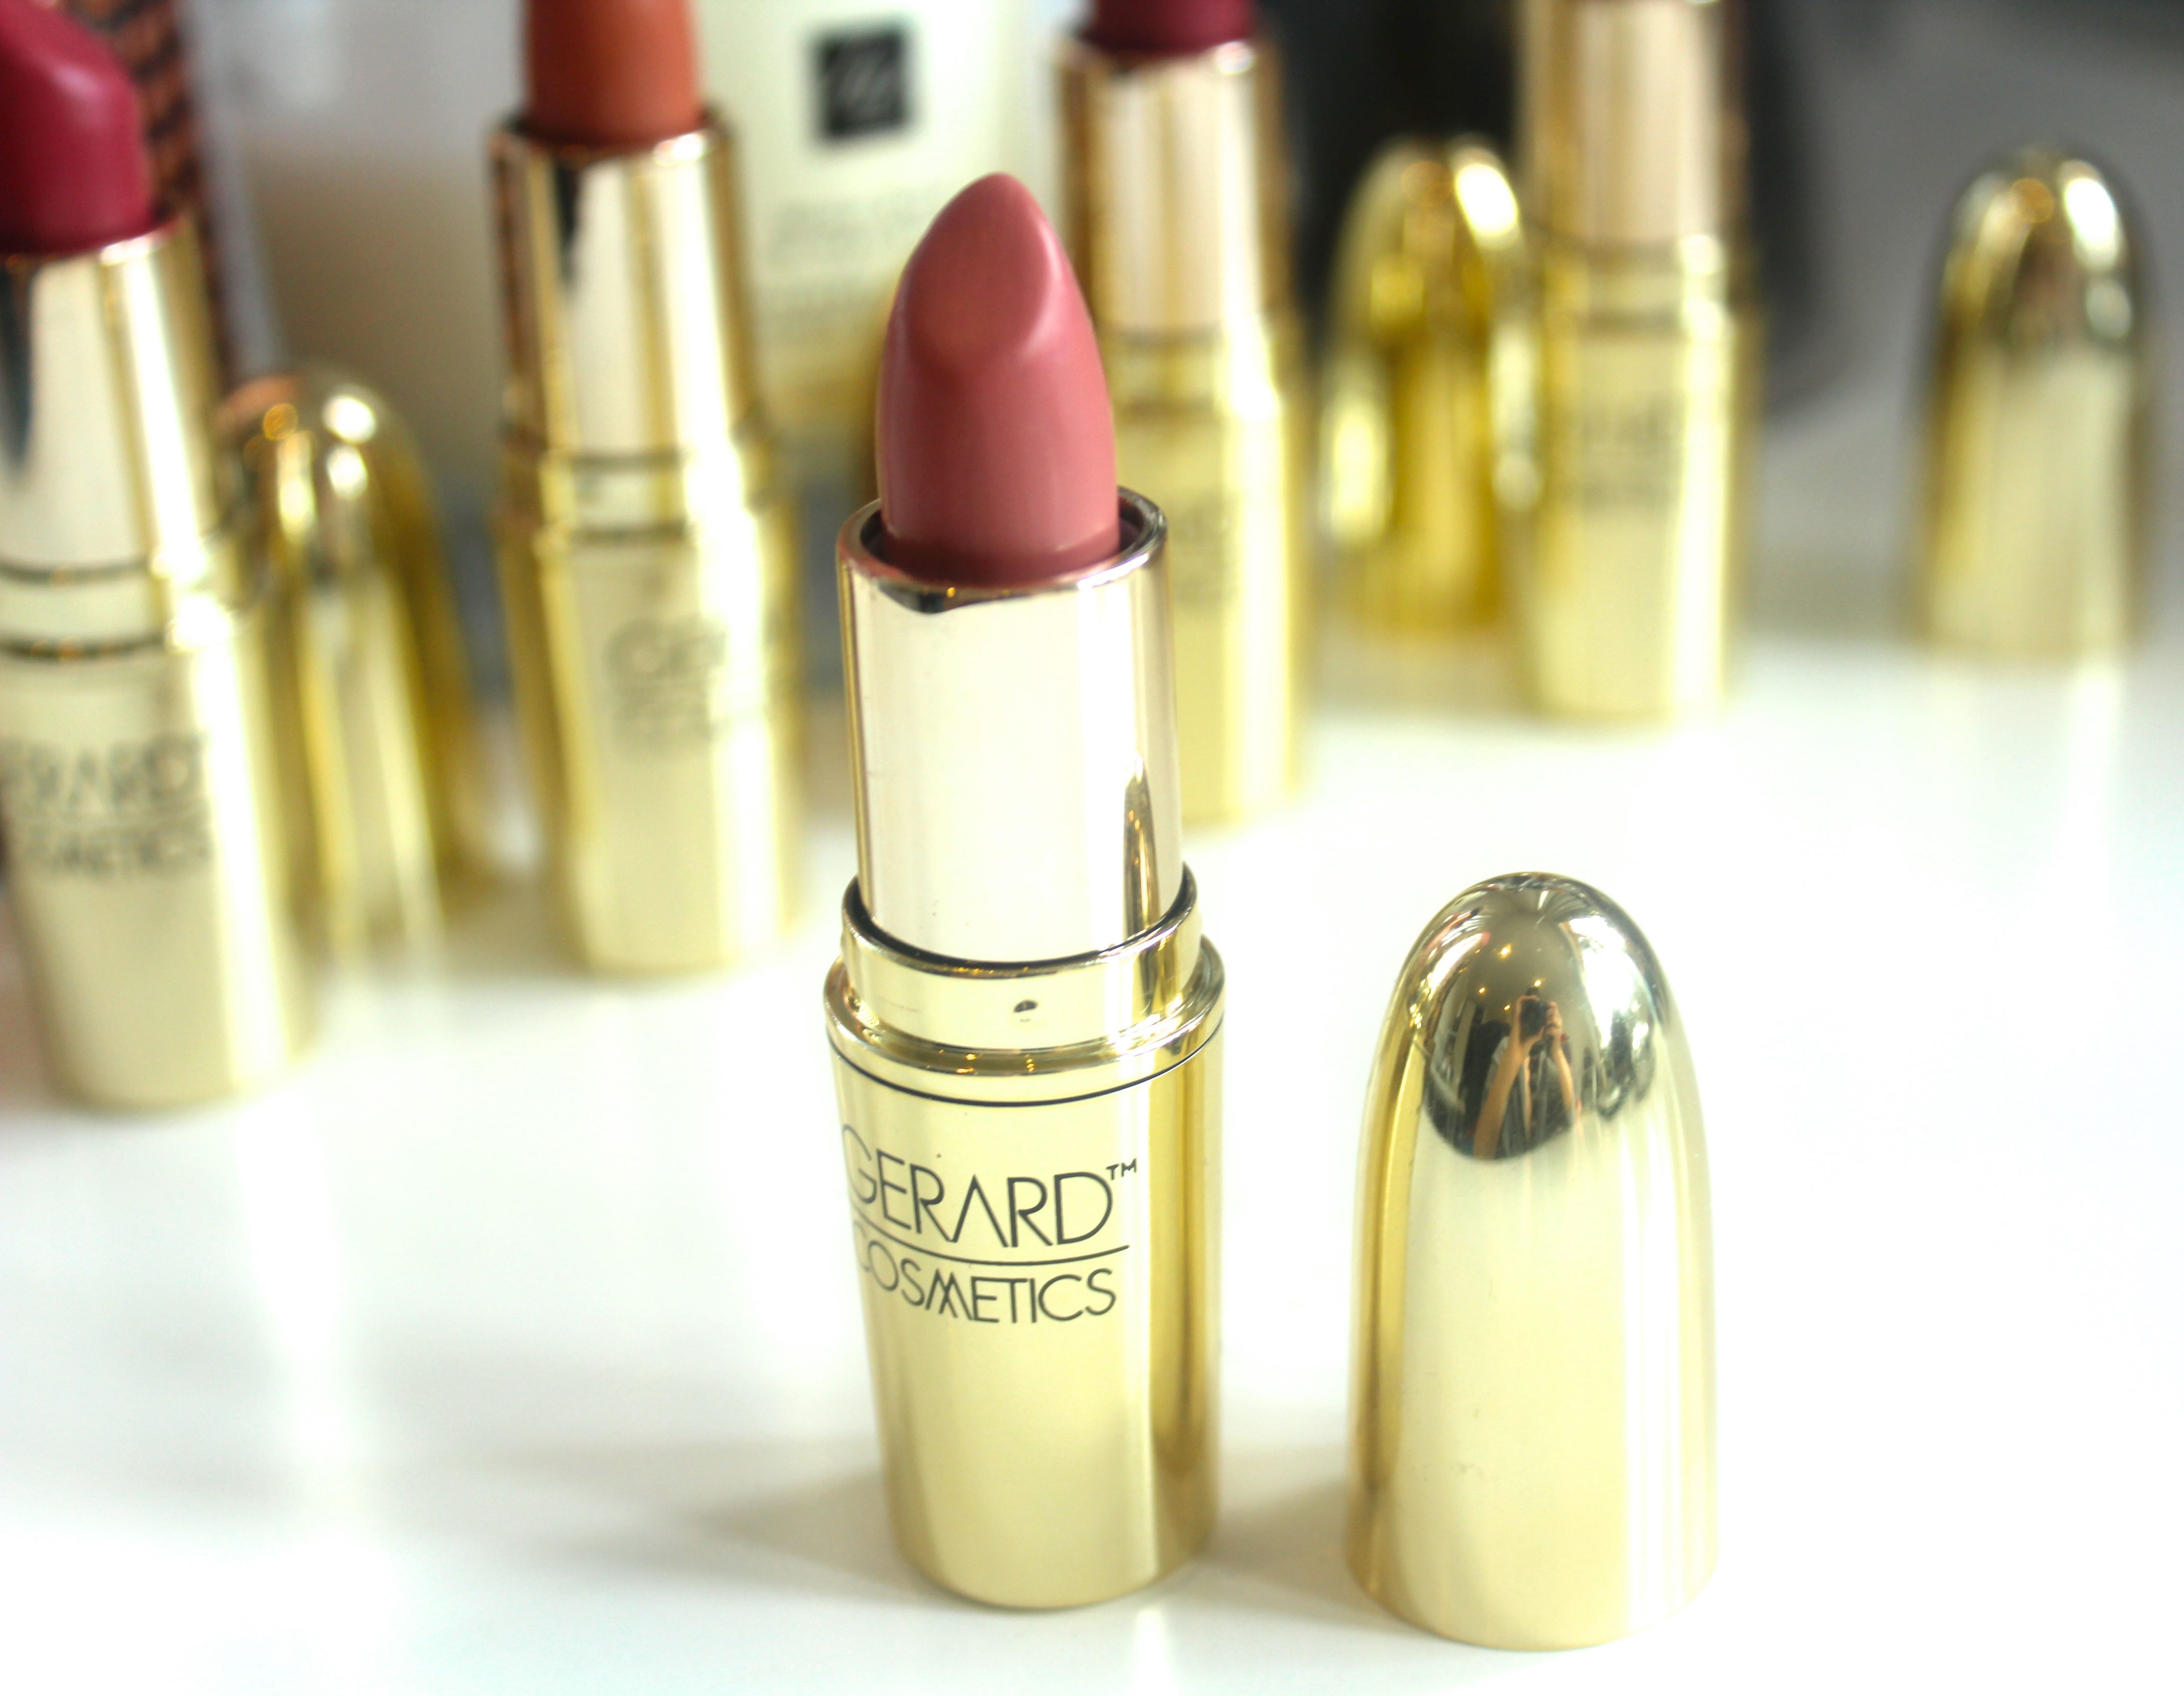 Gerard Lipsticks Butter Cup Review by Face Made Up